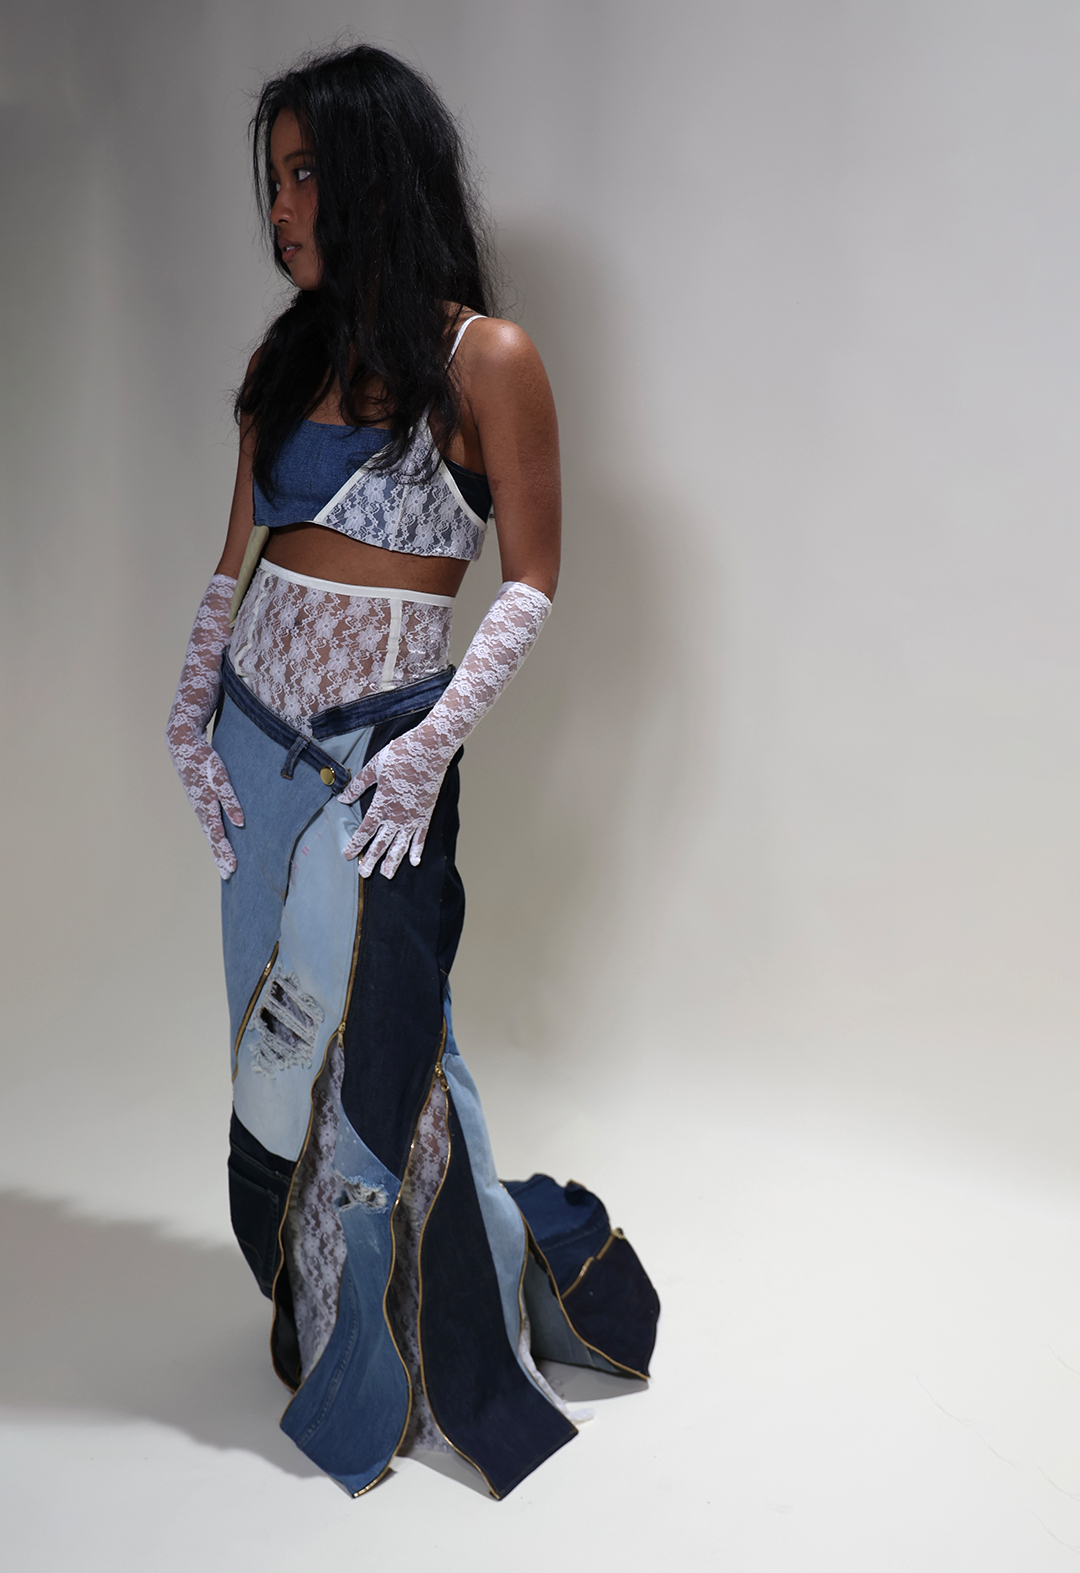 3/4 view of entire look that consists of upcycled denim skirt and bra accompanied with lace and gold zippers.